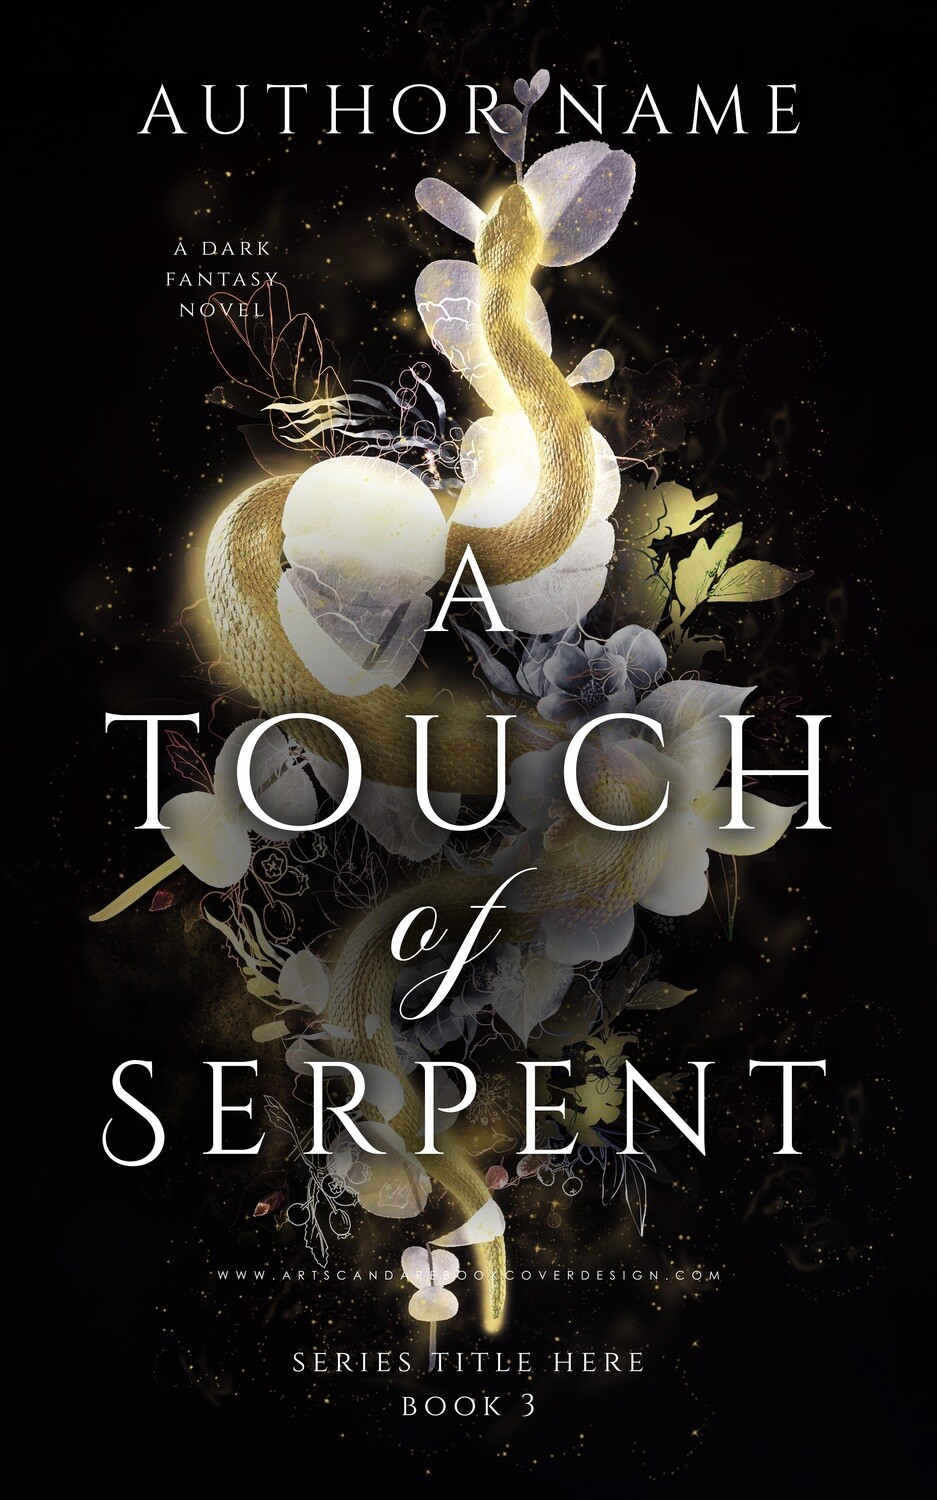 A TOUCH OF SERPENT